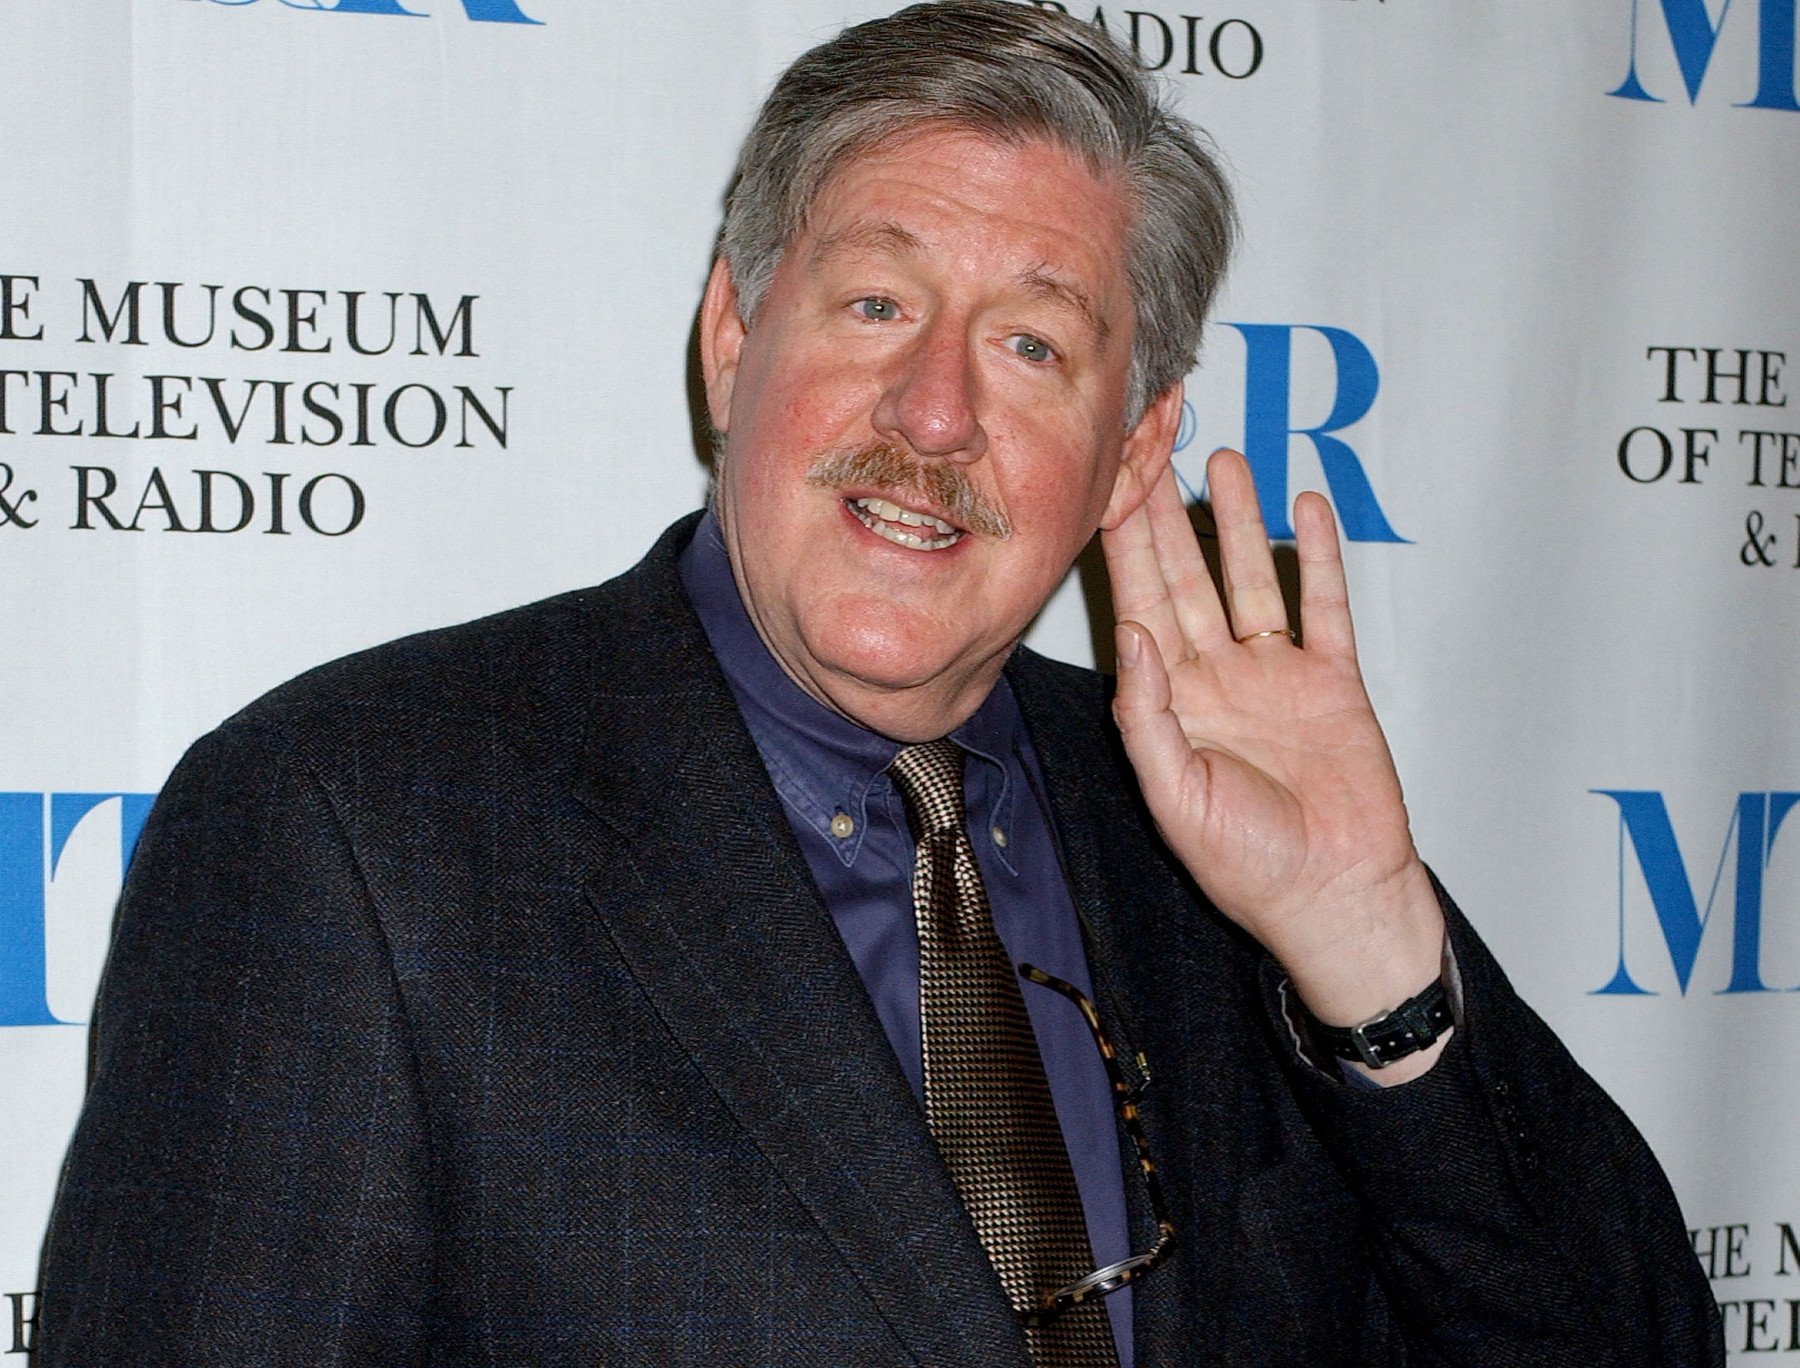 'Gilmore Girls' star Edward Herrmann, who criticized the real town Stars Hollow is based on. He's wearing a blue shirt, black suit, and holding his hand to his ear.